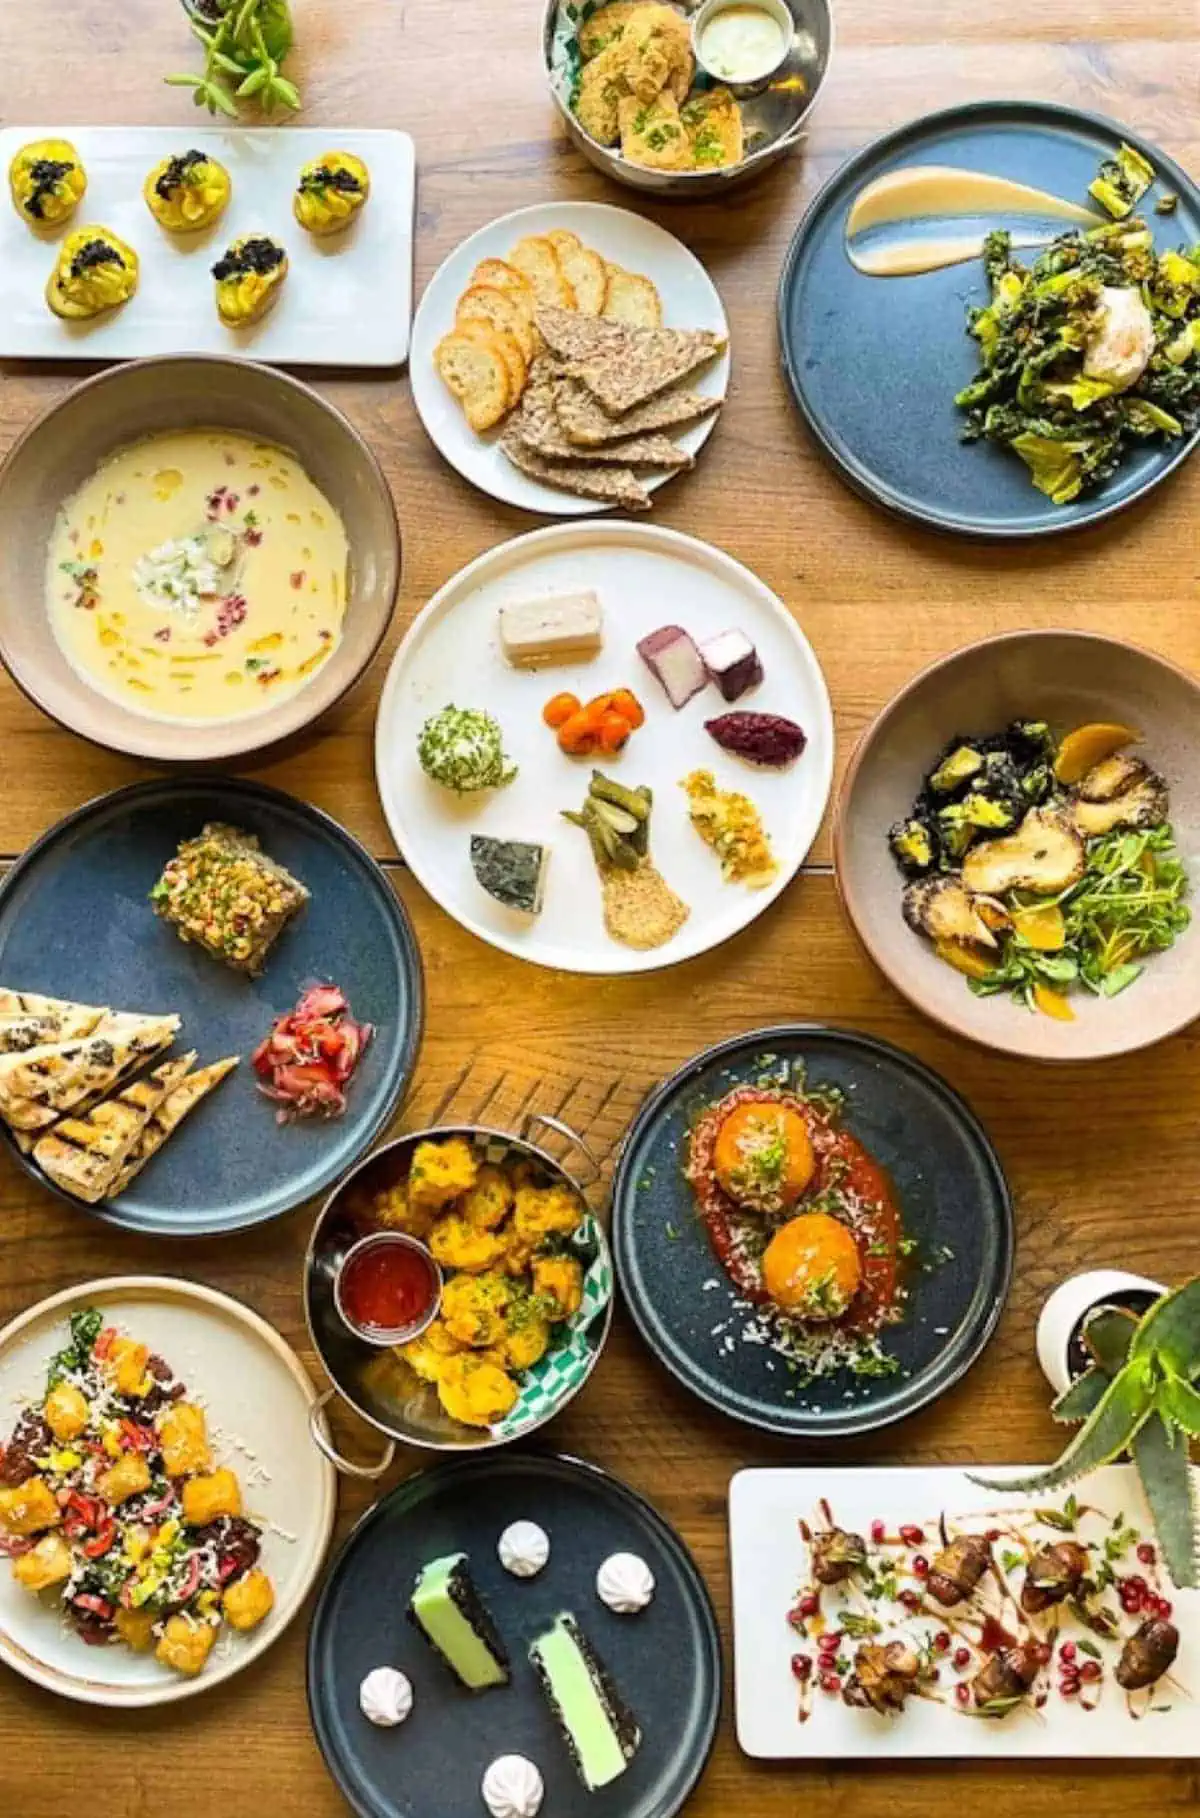 A spread of vegan spring menu items at Fancy Plants in Chicago.